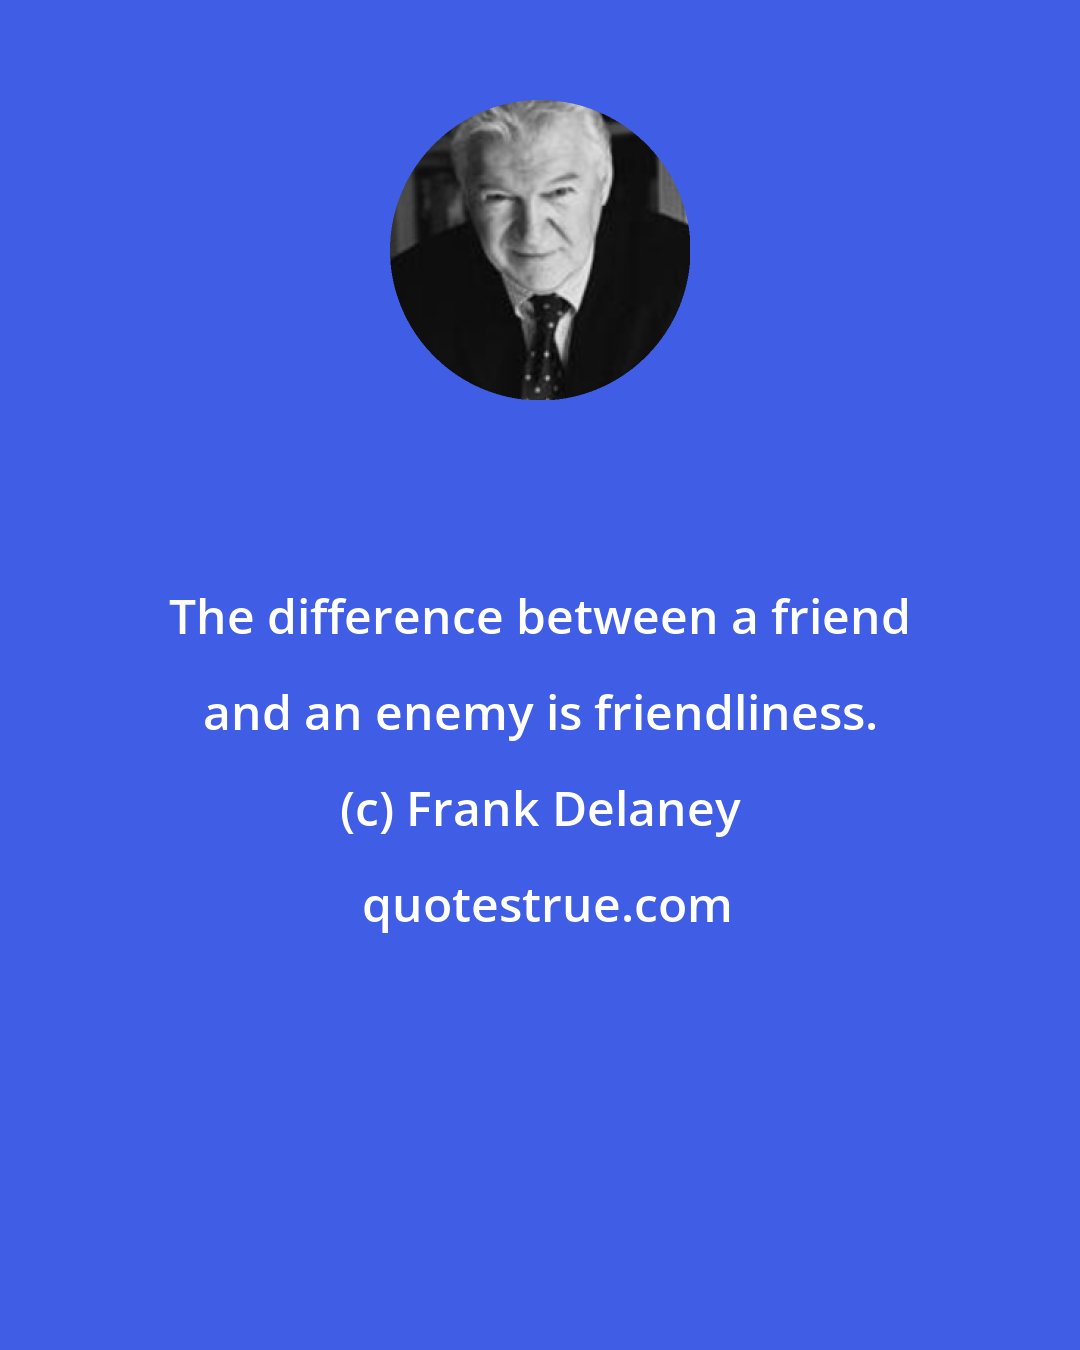 Frank Delaney: The difference between a friend and an enemy is friendliness.